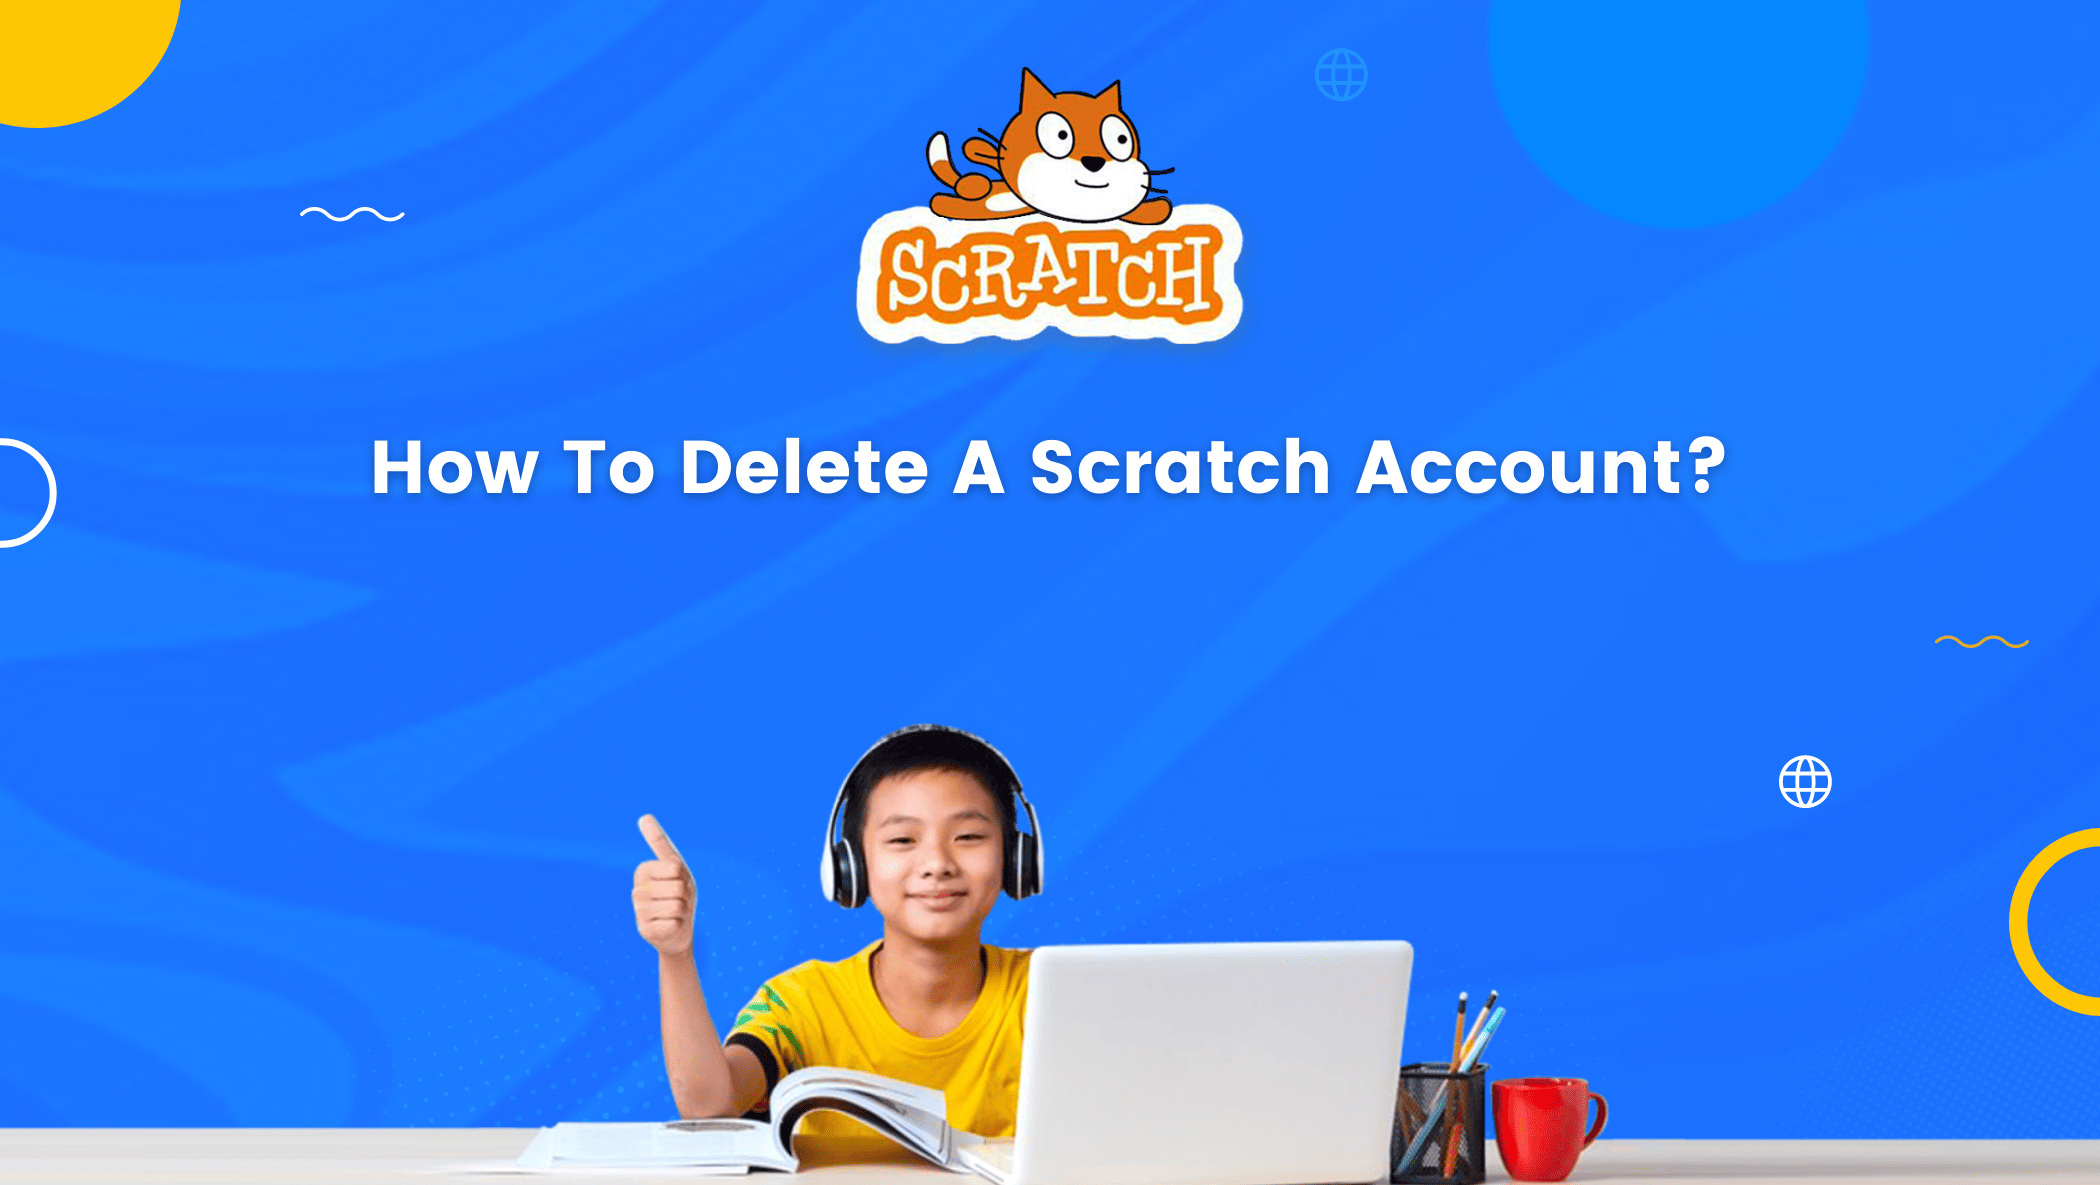 How To Delete A Scratch Account